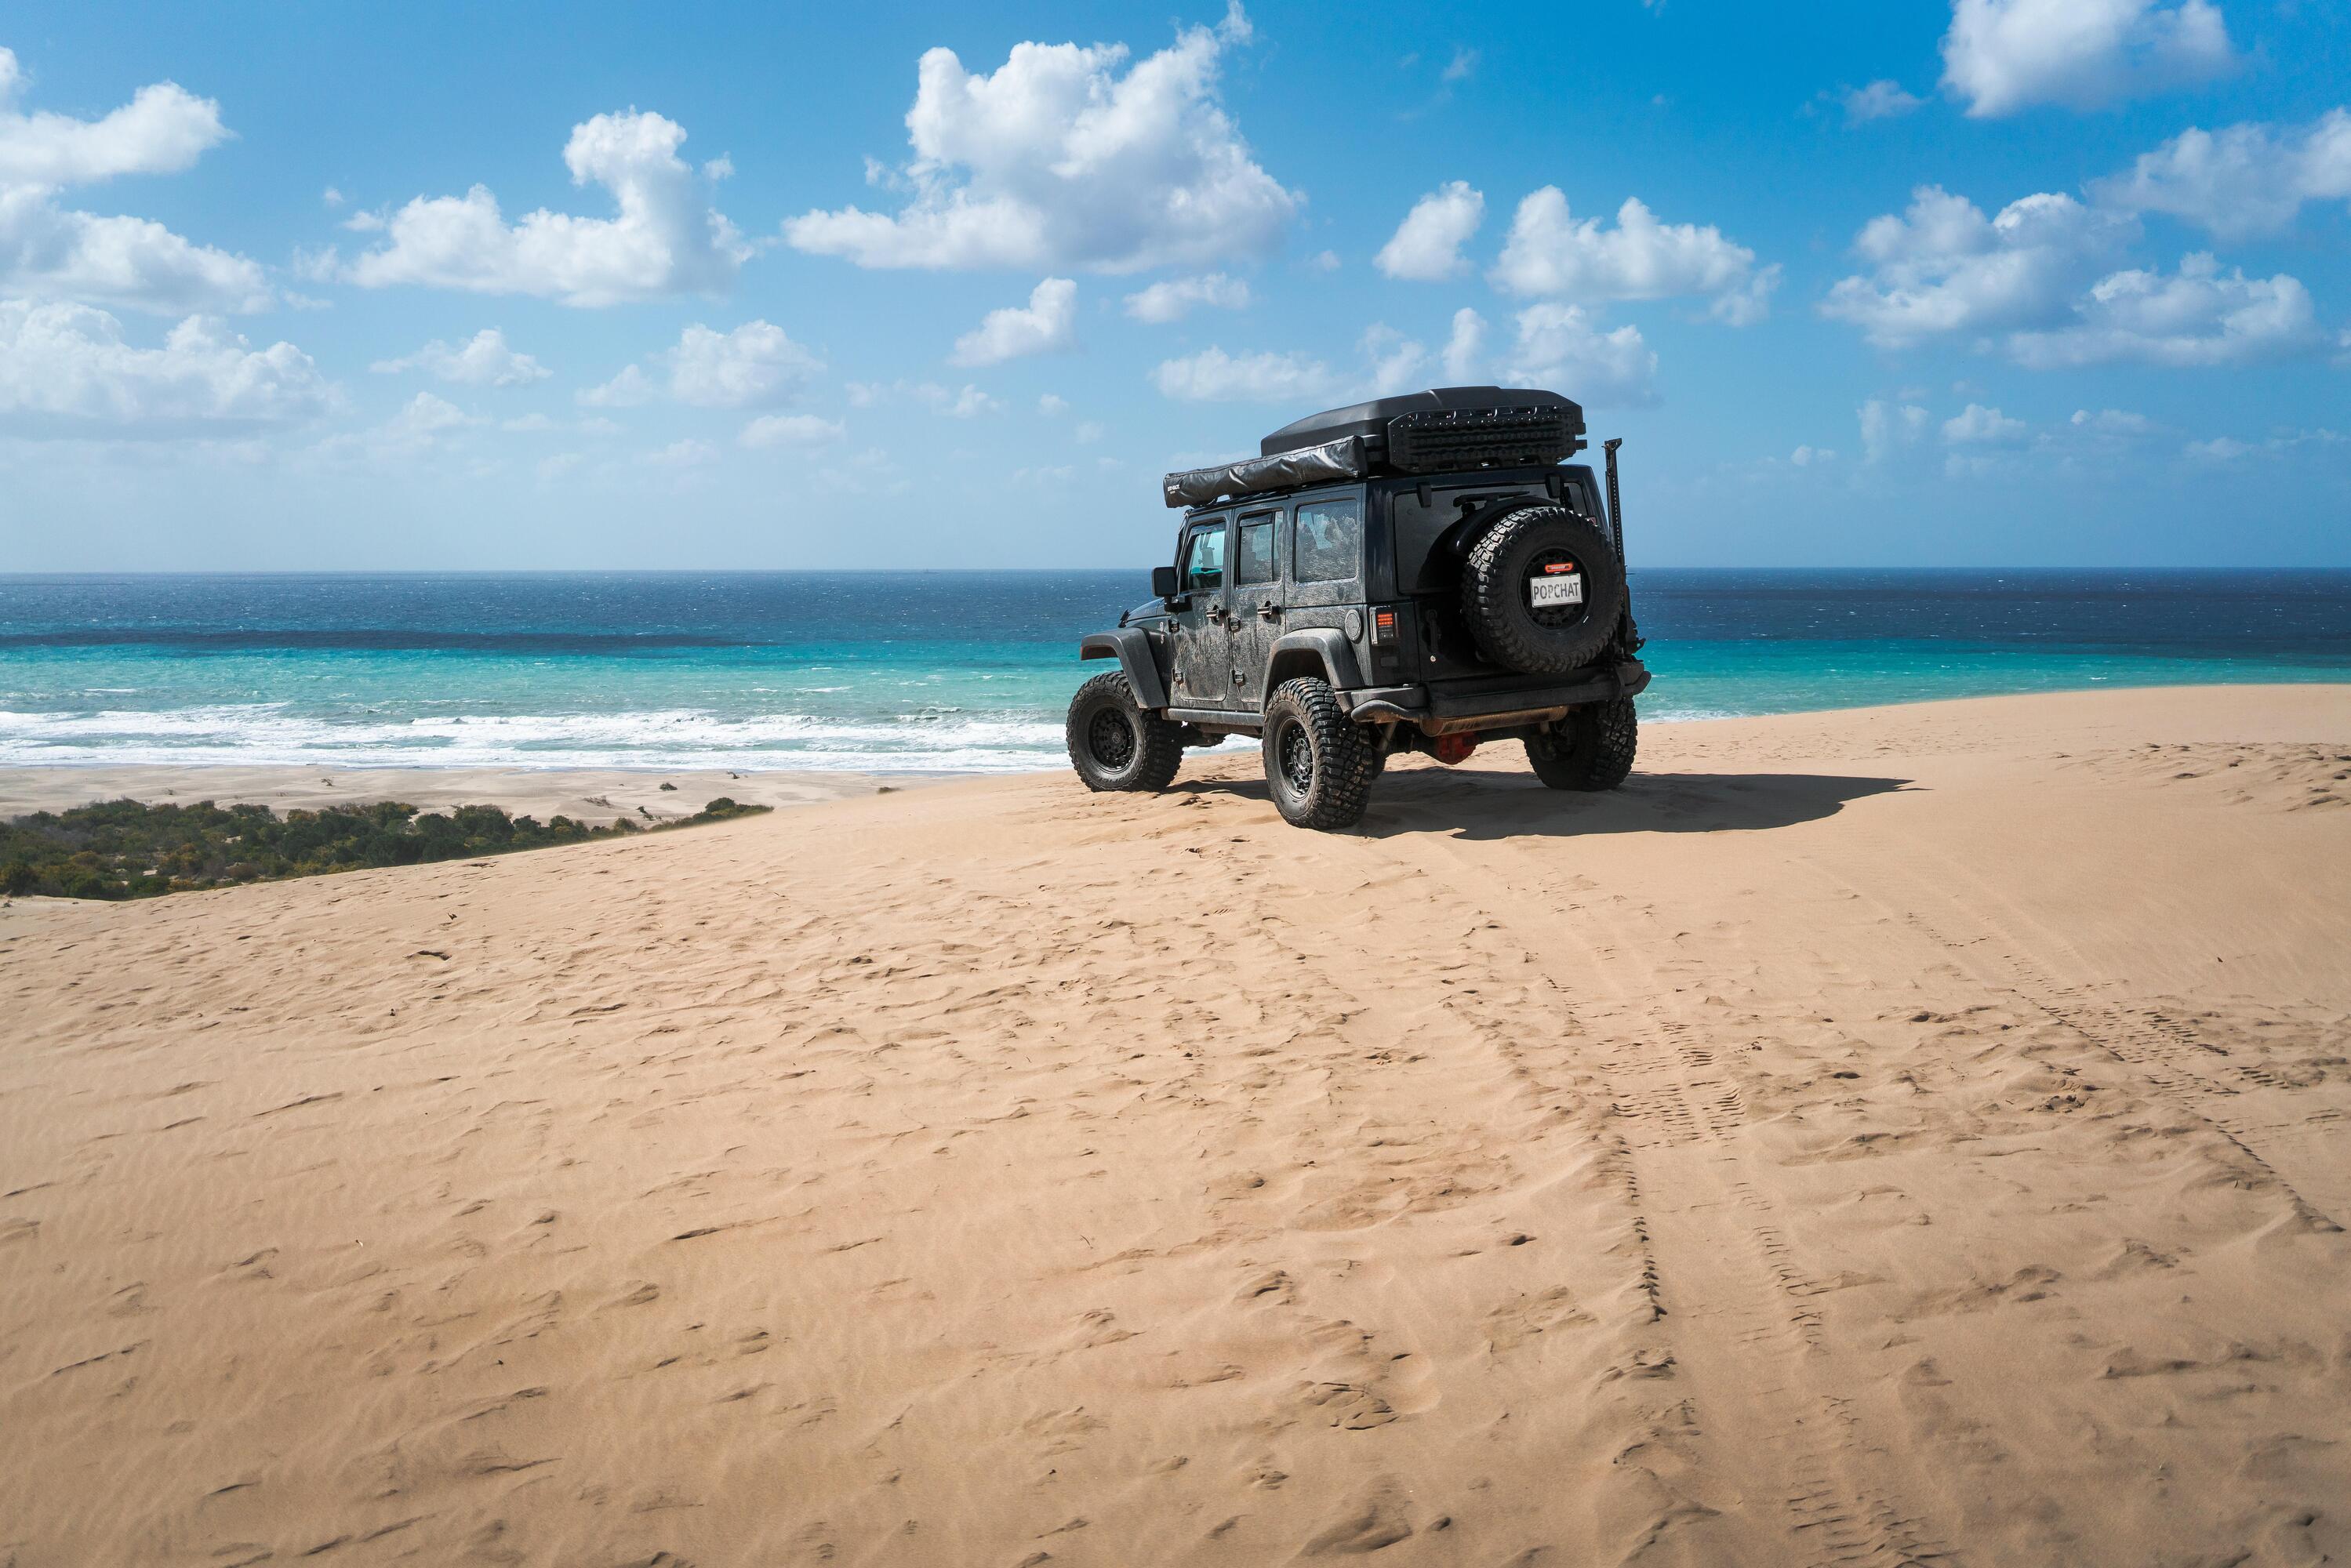 Jeep on a beach with a Popchat license plate